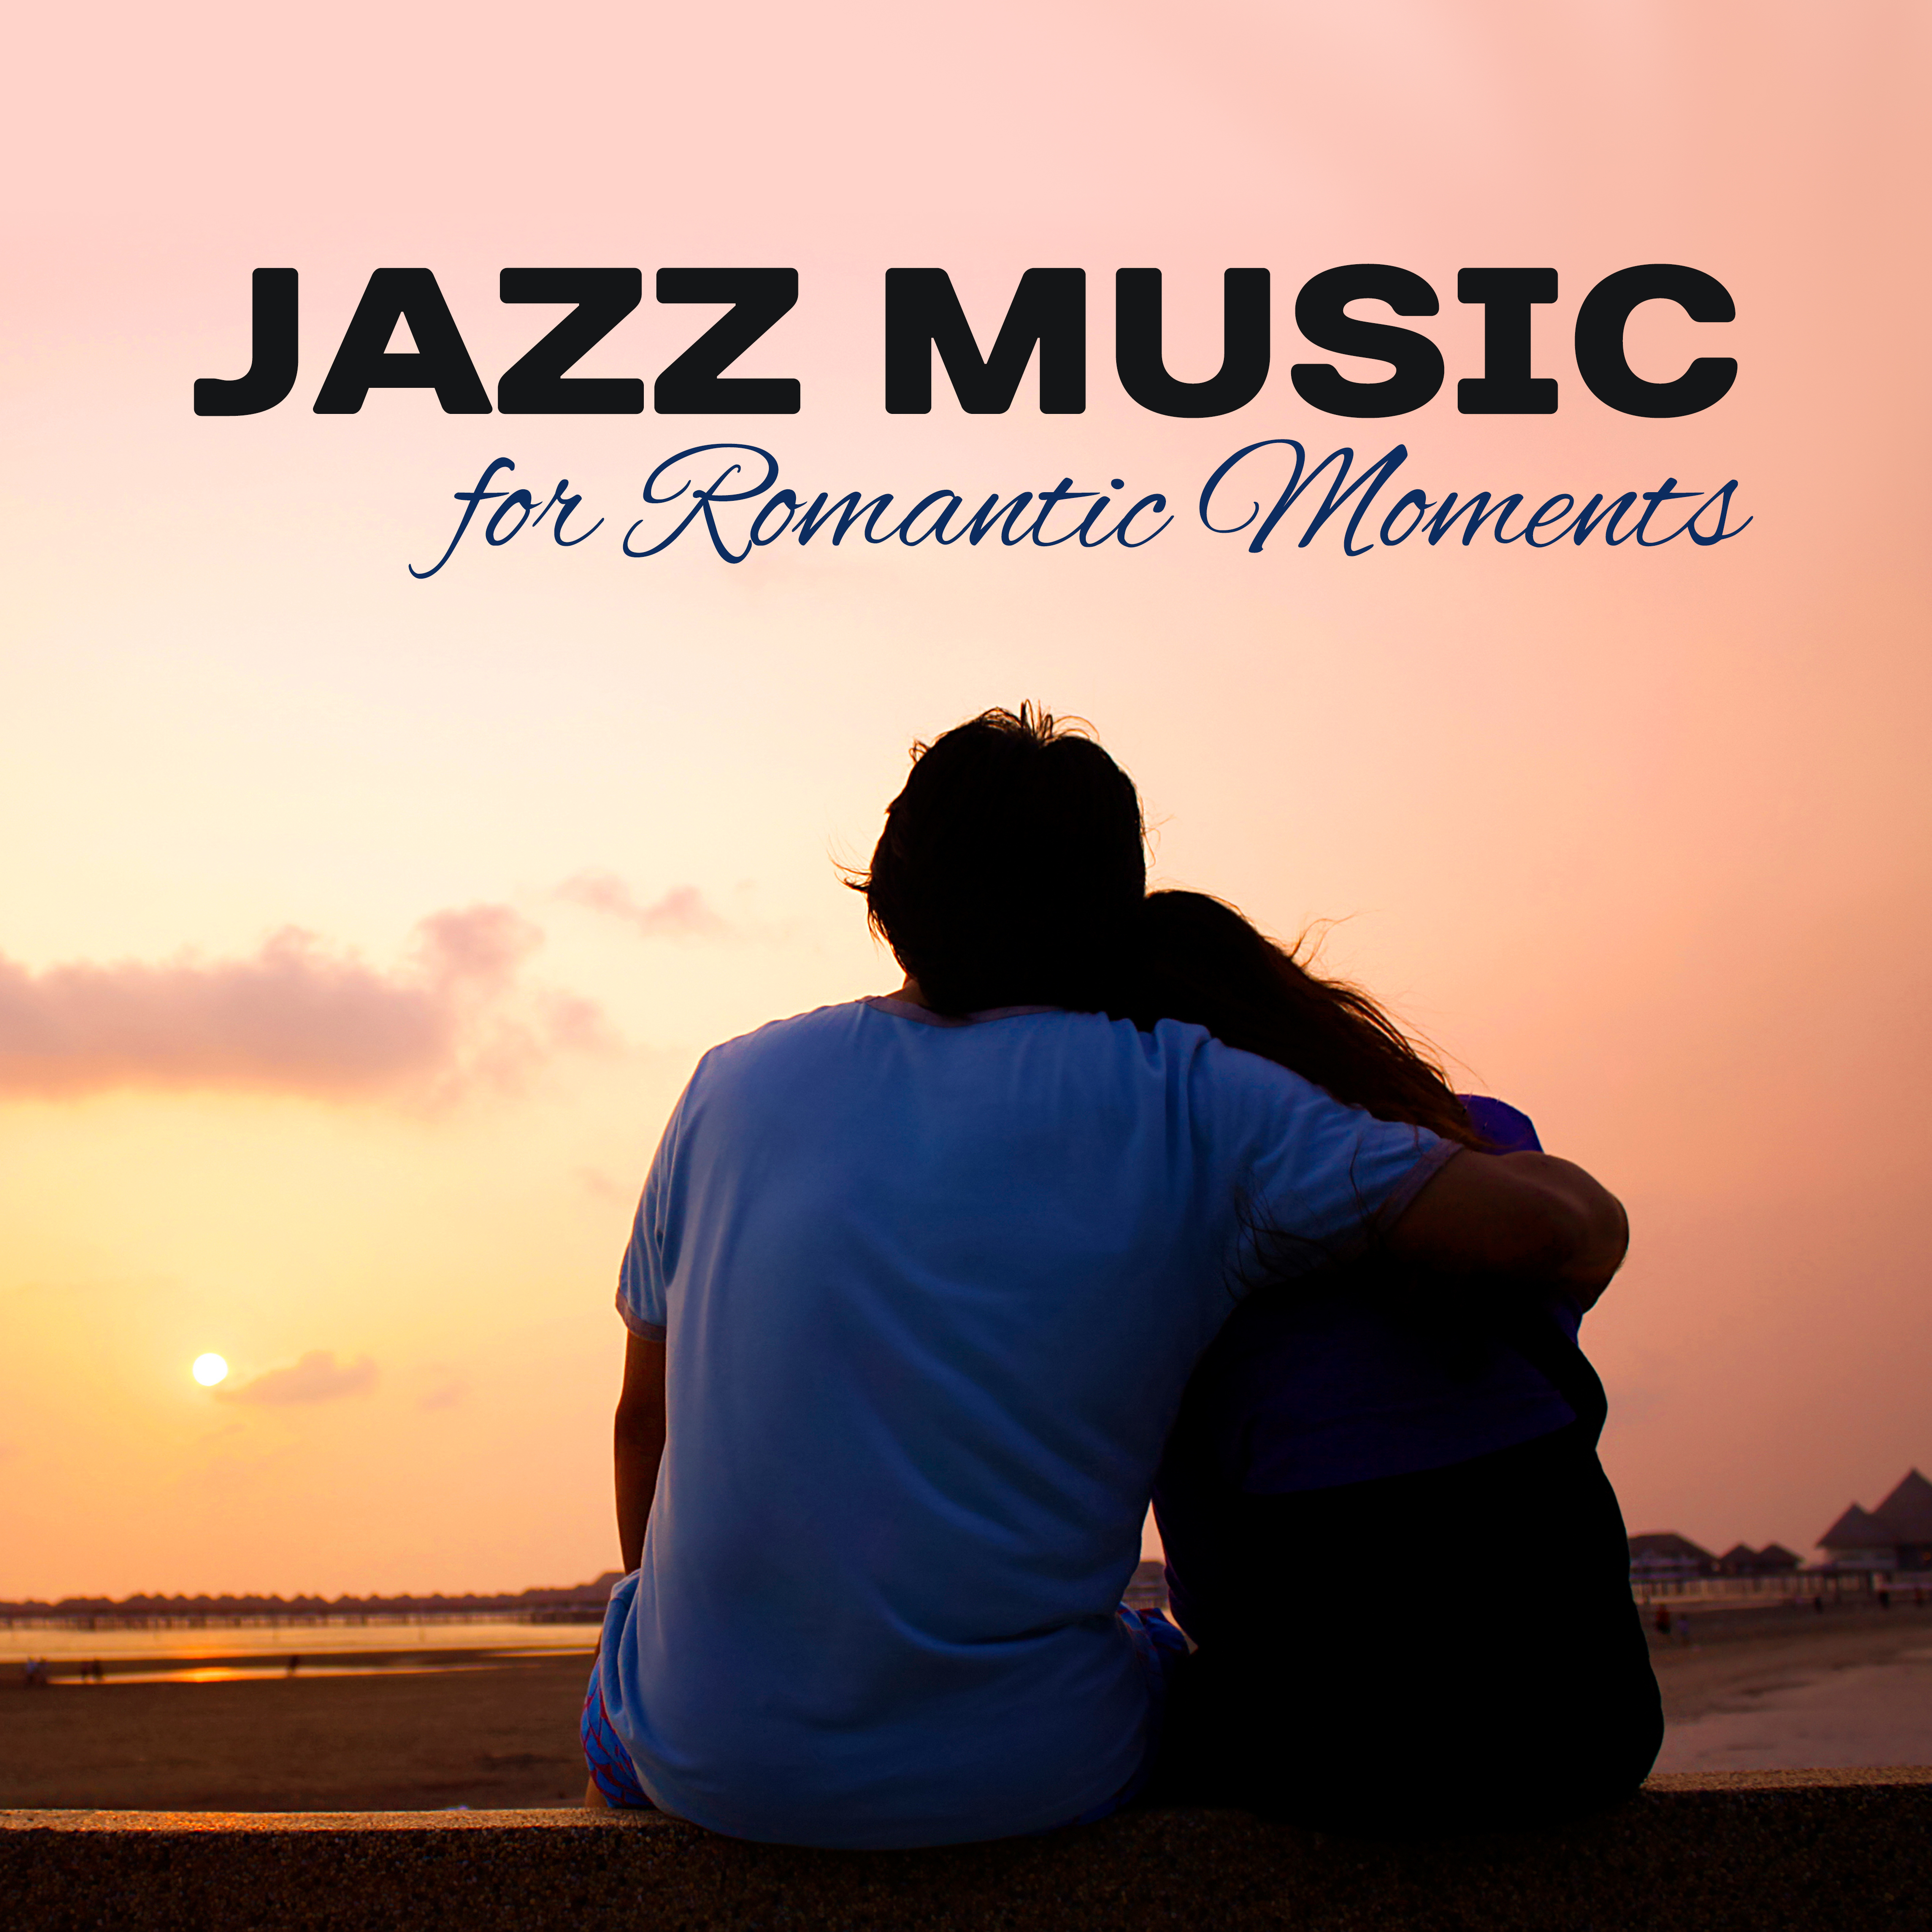 Jazz Music for Romantic Moments  Candle Light Dinner, Romantic Restaurant Jazz, Smooth Melodies, Piano Bar